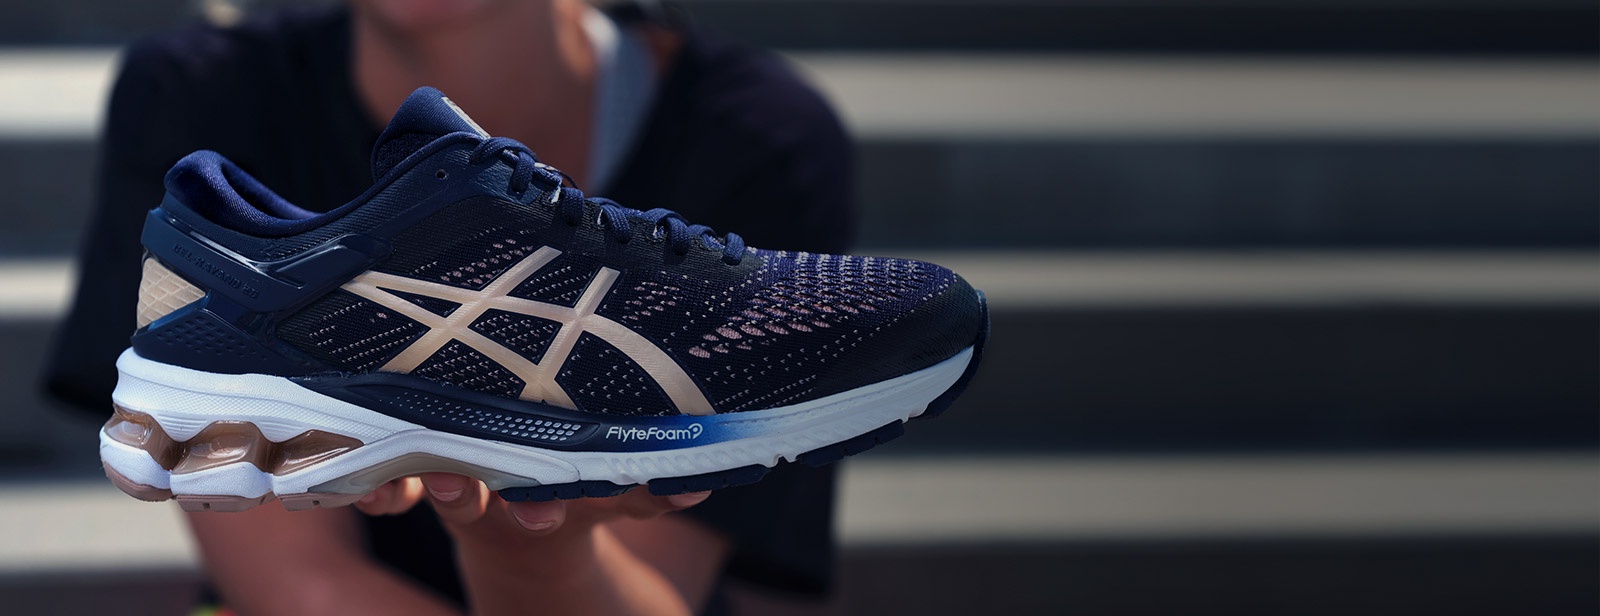 GEL-KAYANO® 26 | PROTECT YOUR EVERY STEP